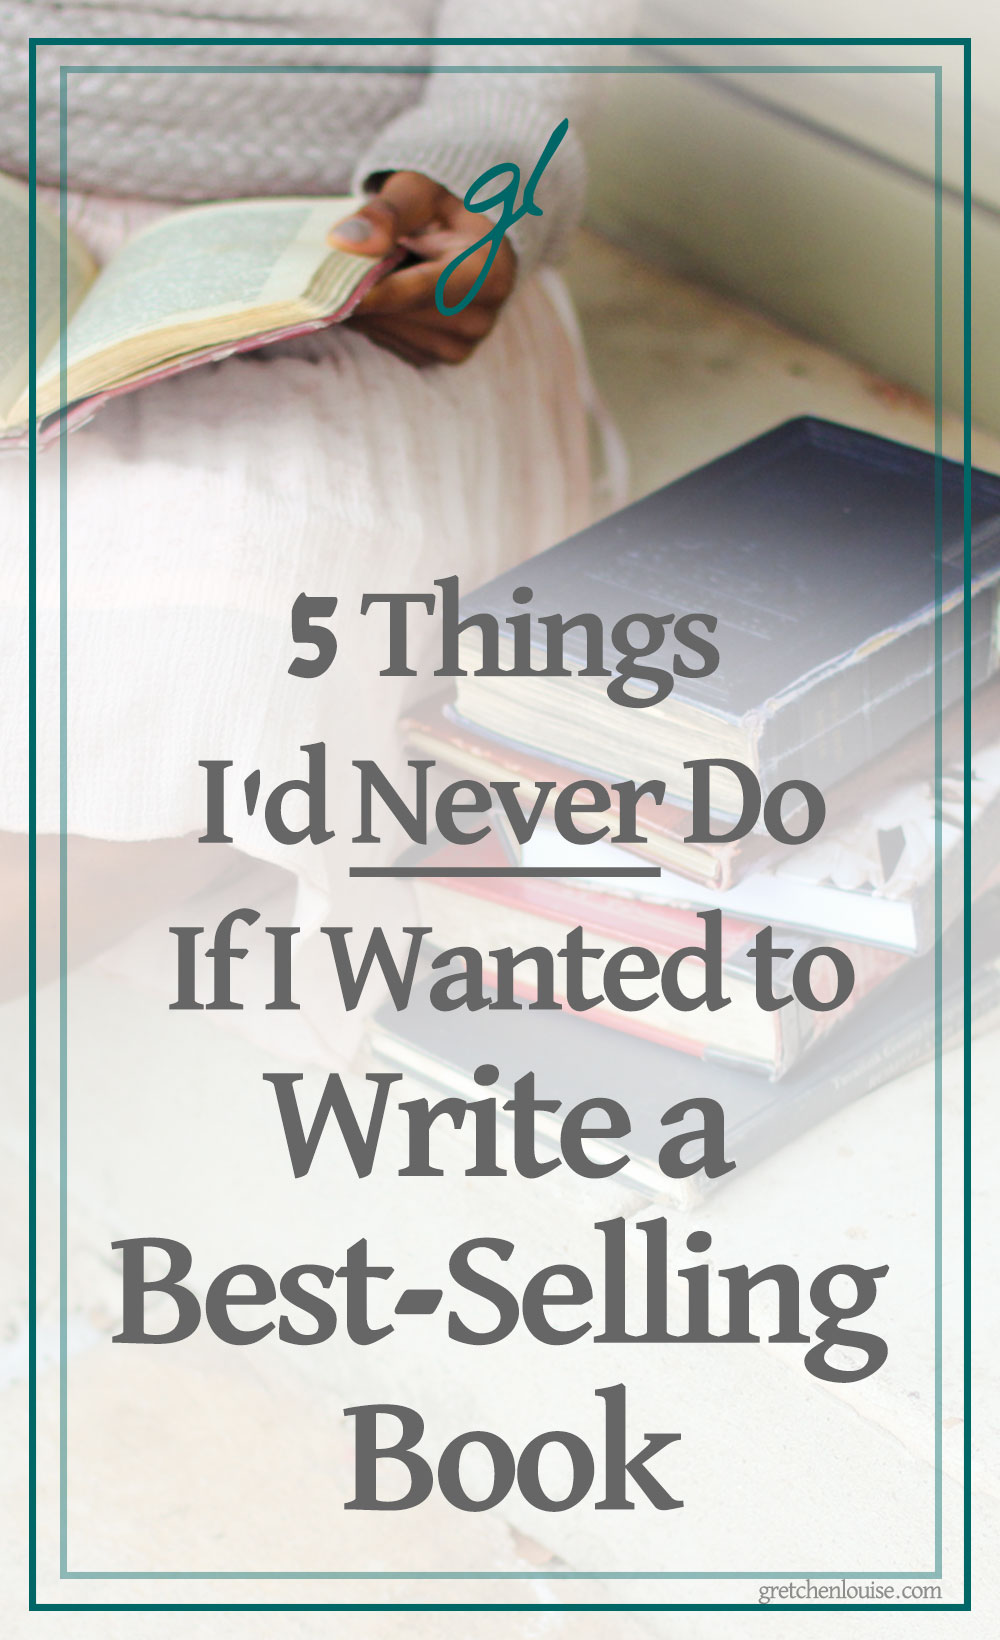 Maybe you're writing a beautiful or incredibly interesting book of your own. One that you think just might be a best-seller. If you are, here are a few things I would never do. via @GretLouise